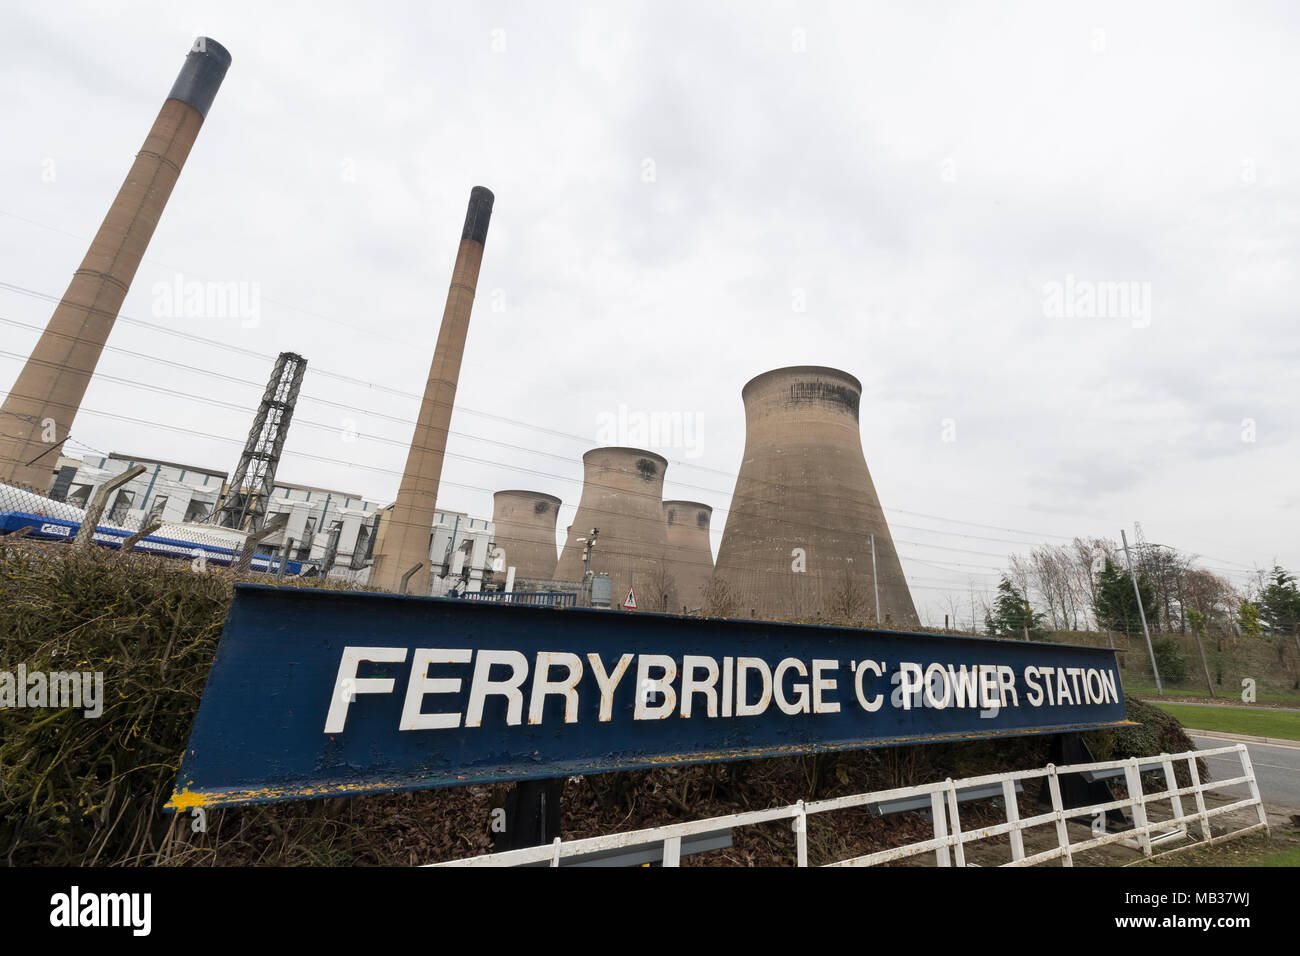 General view of Ferrybridge C Power Station, which has been decommissioned. Ferrybridge, Yorkshire, UK. 6th April 2018. Stock Photo